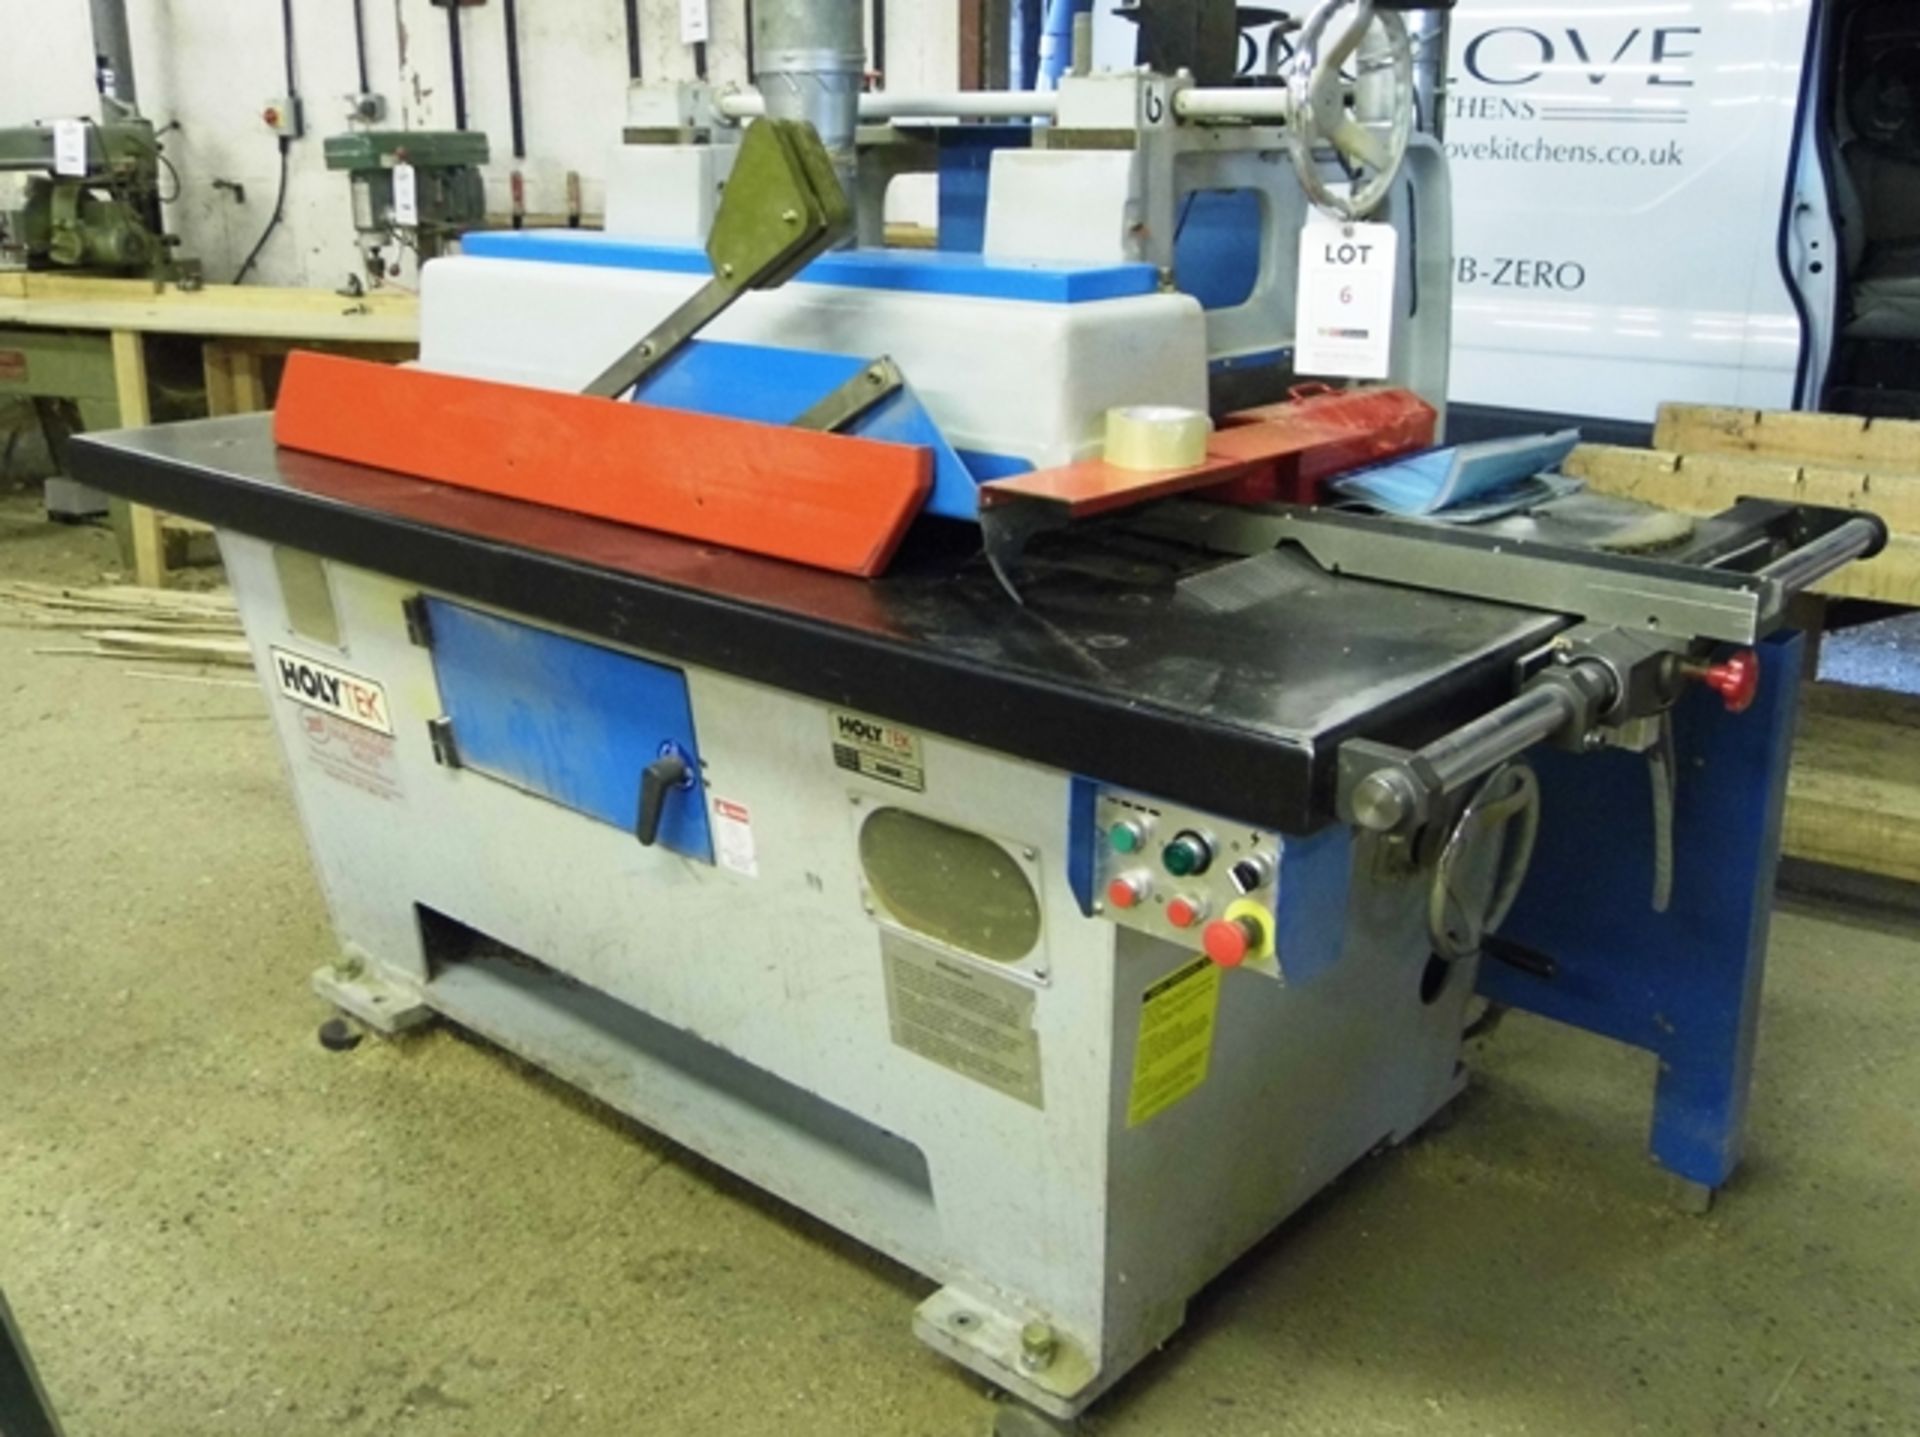 Holytek straight line rip saw model HR-20 with motorised feed and laser line guide, Serial No.